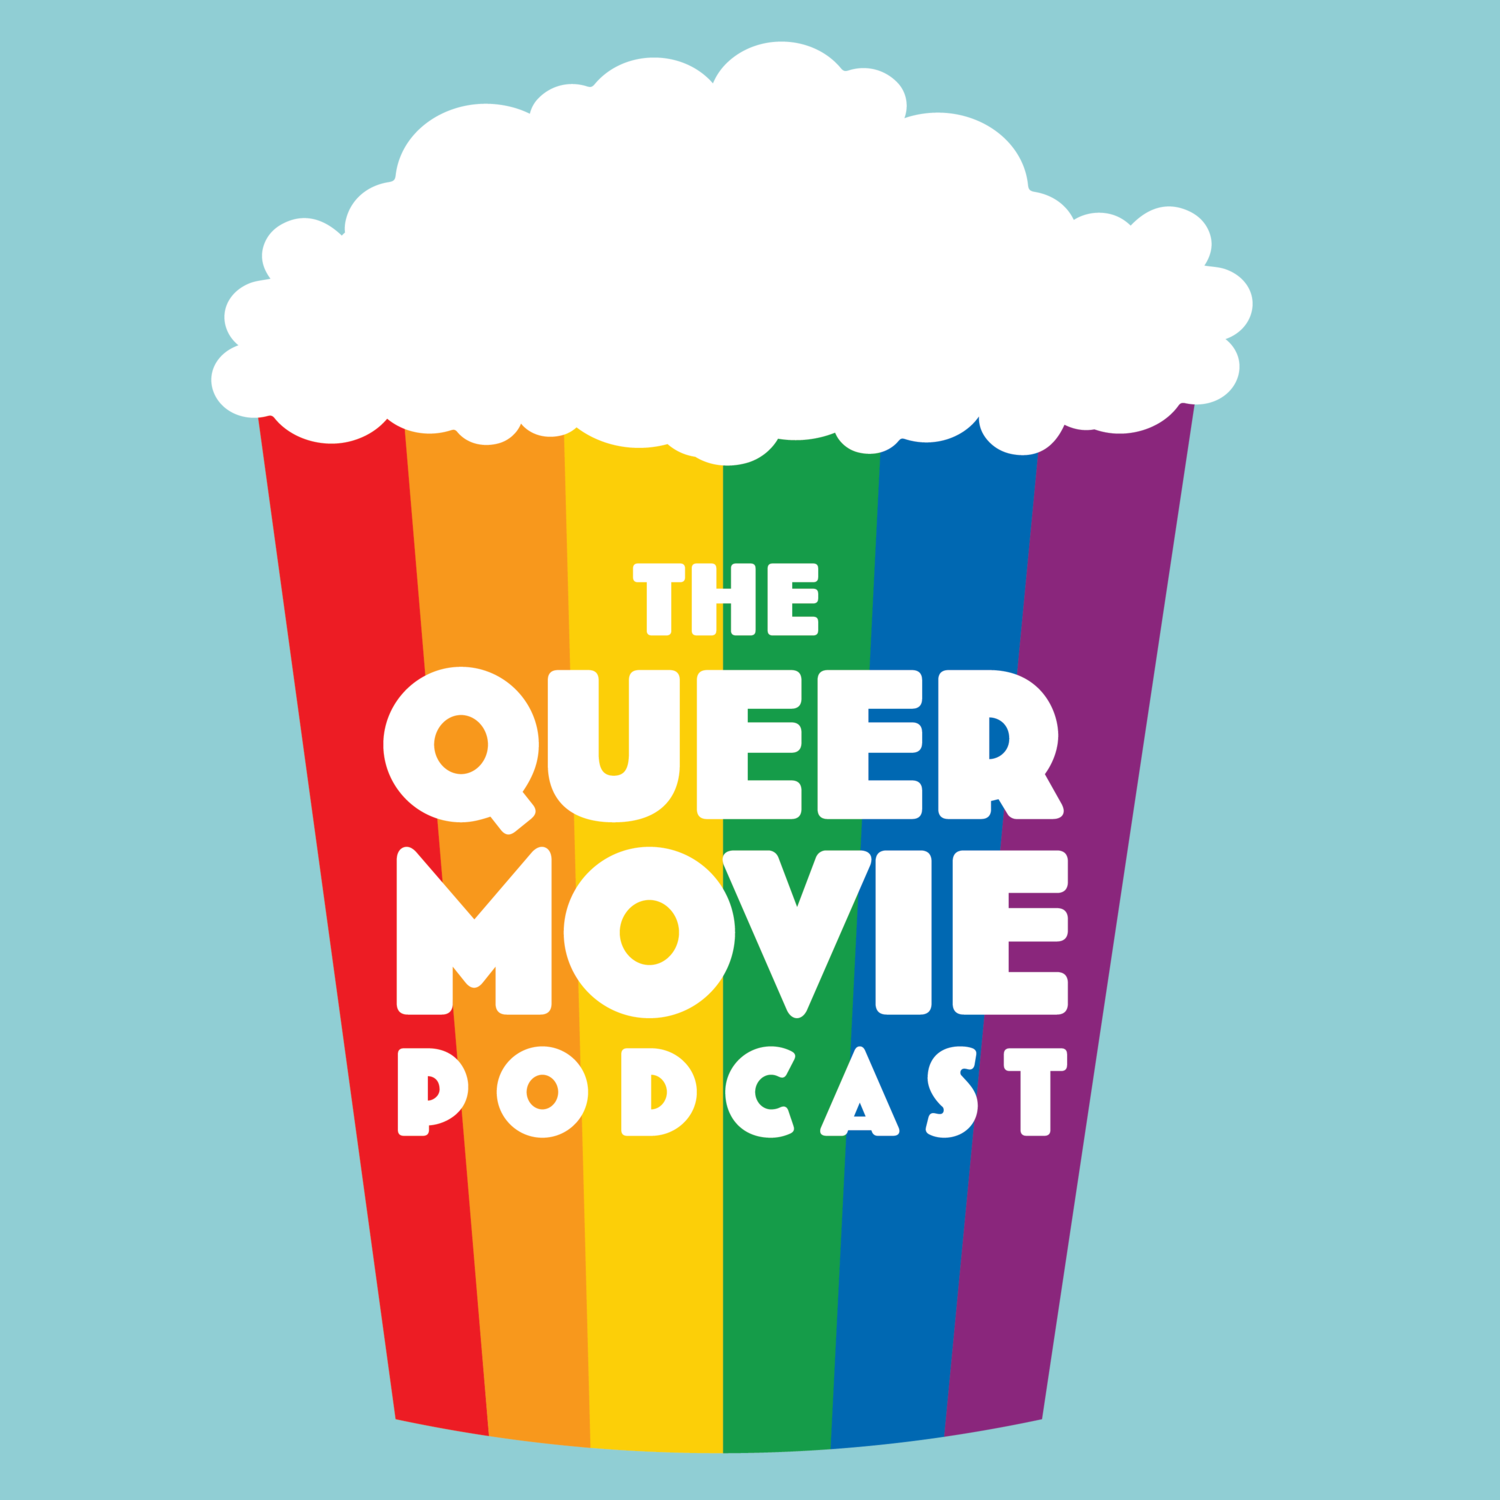 The Queer Movie Podcast